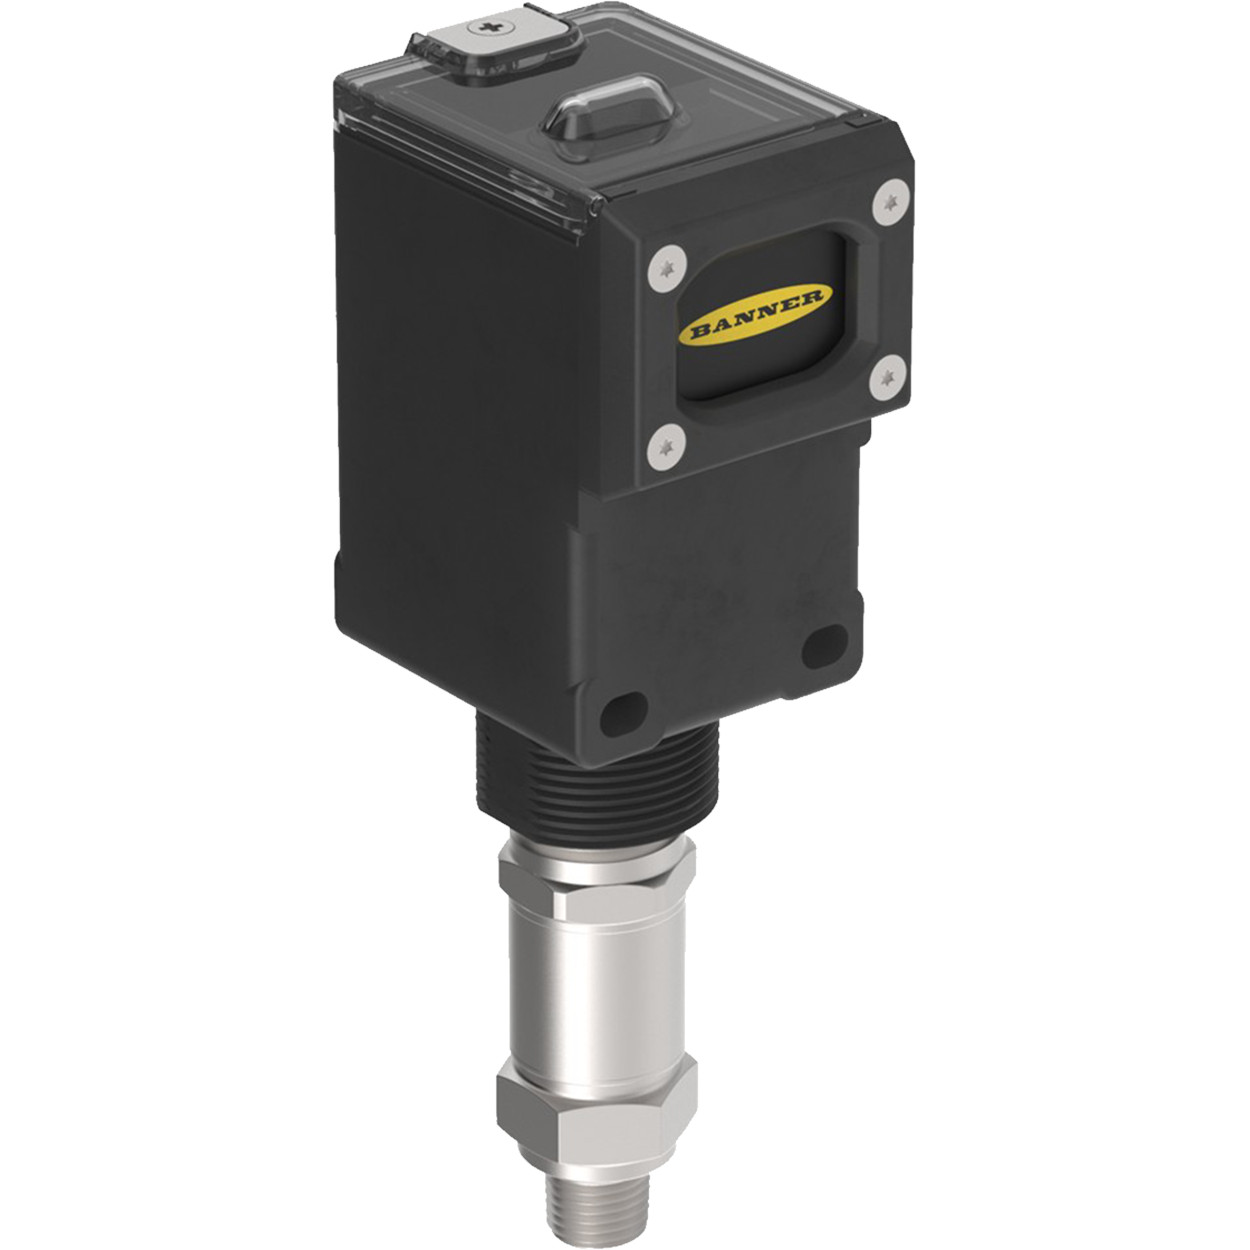 BANNER WIRELESS Q45PS ALL-IN-ONE PRESSURE SENSOR